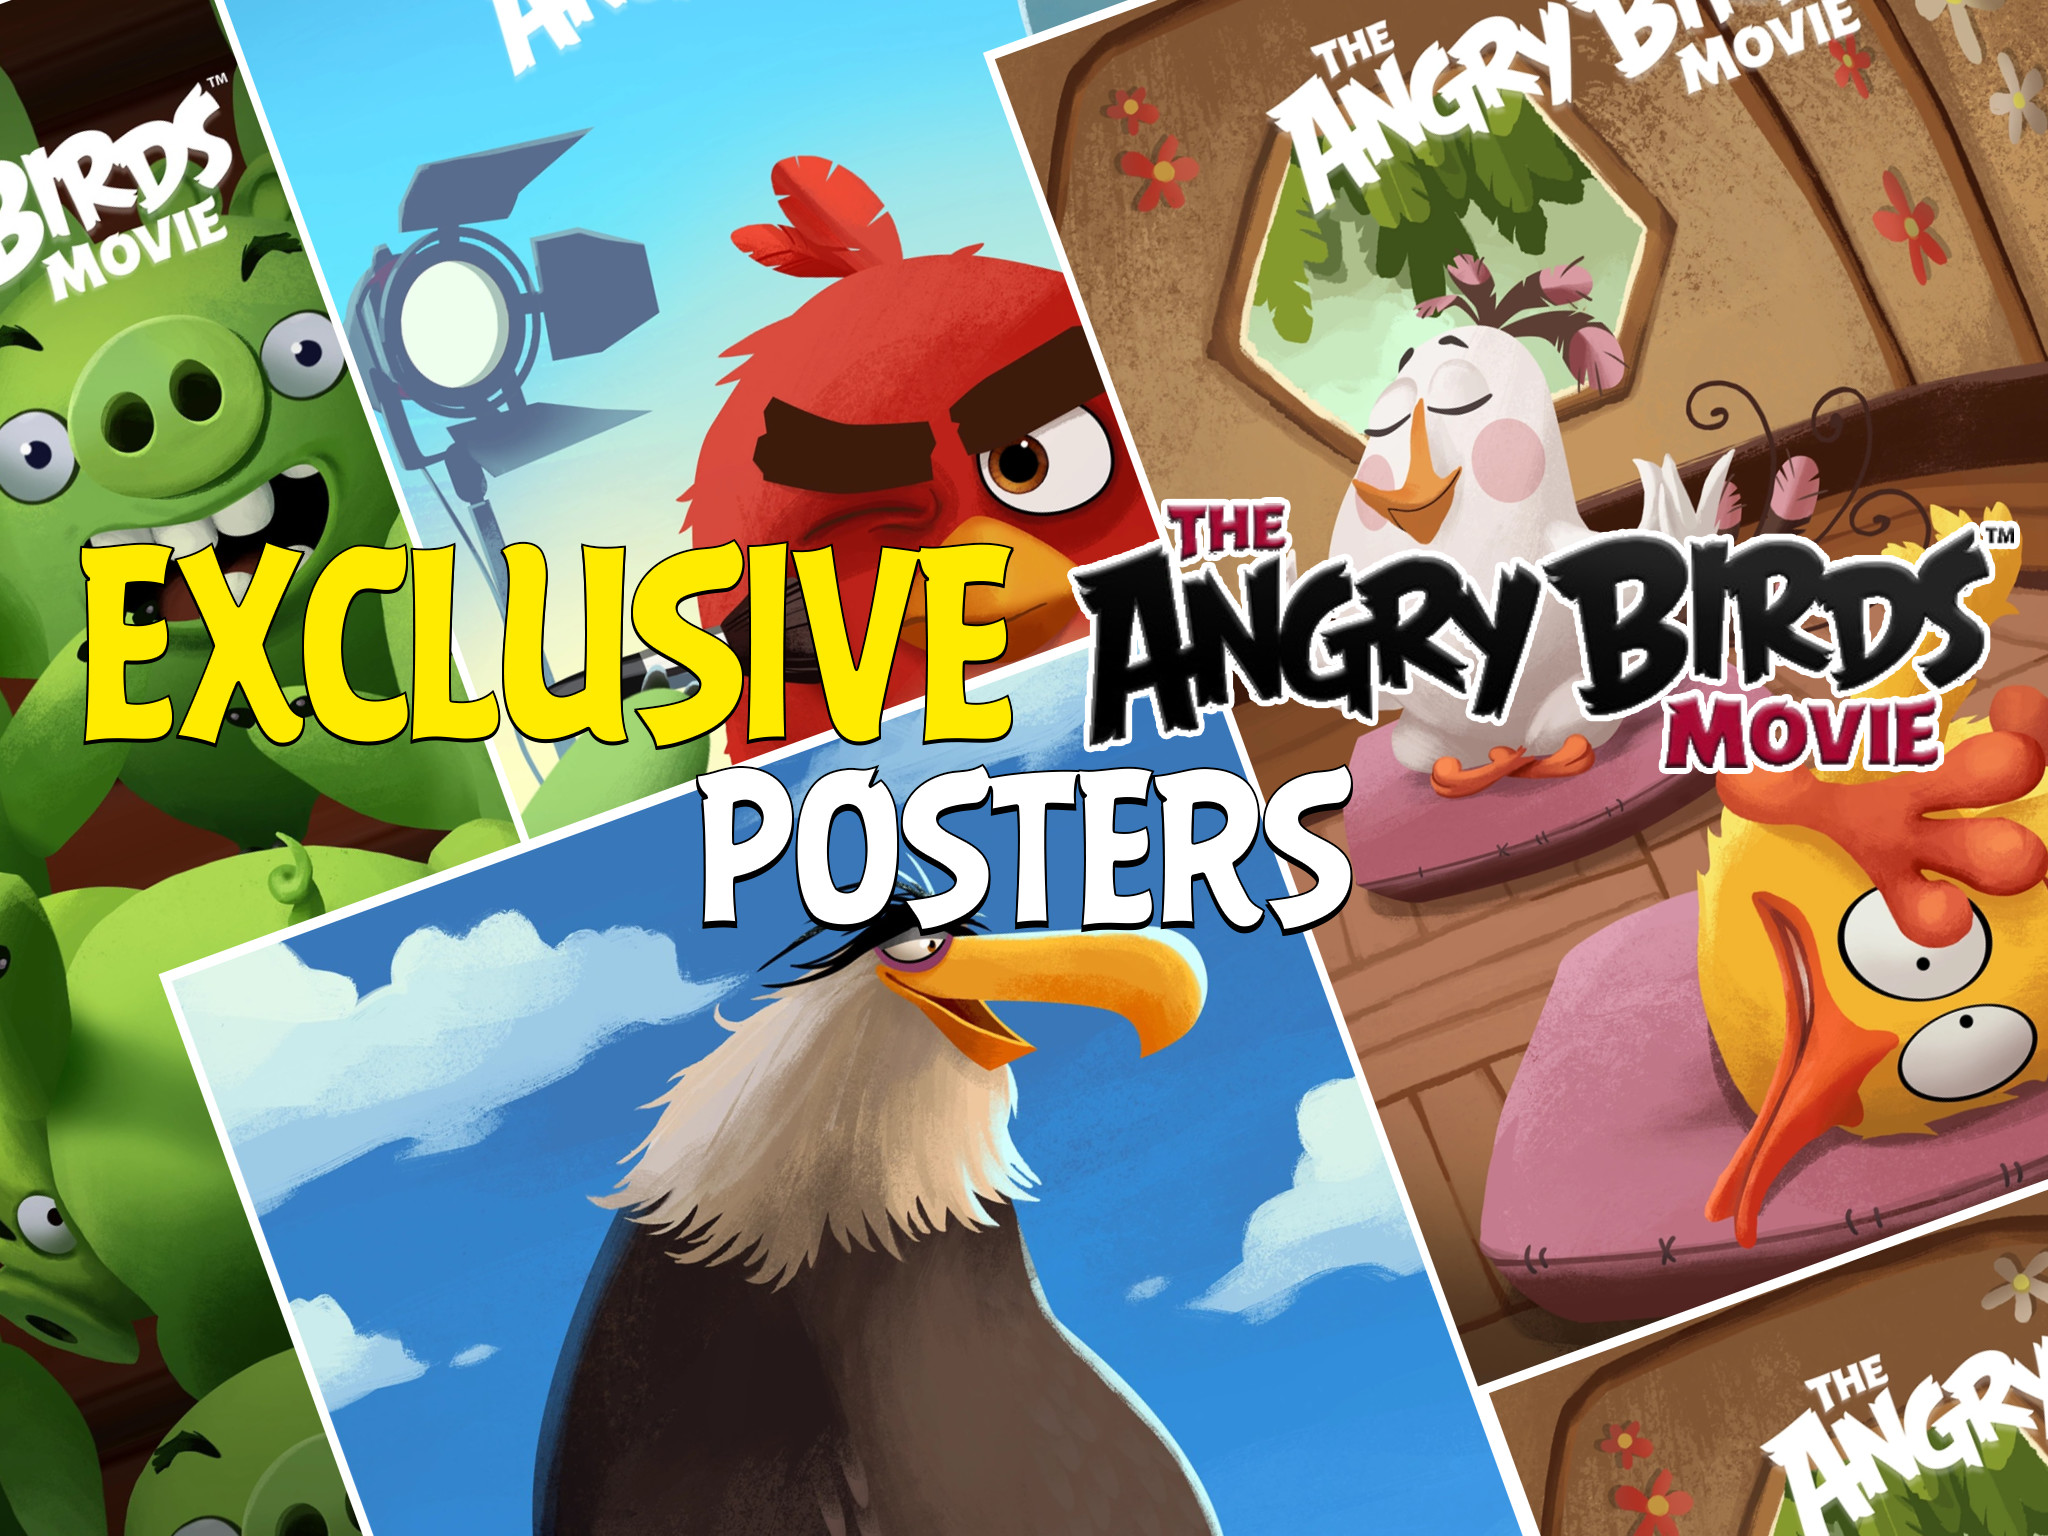 Angry-Birds-Movie-Posters